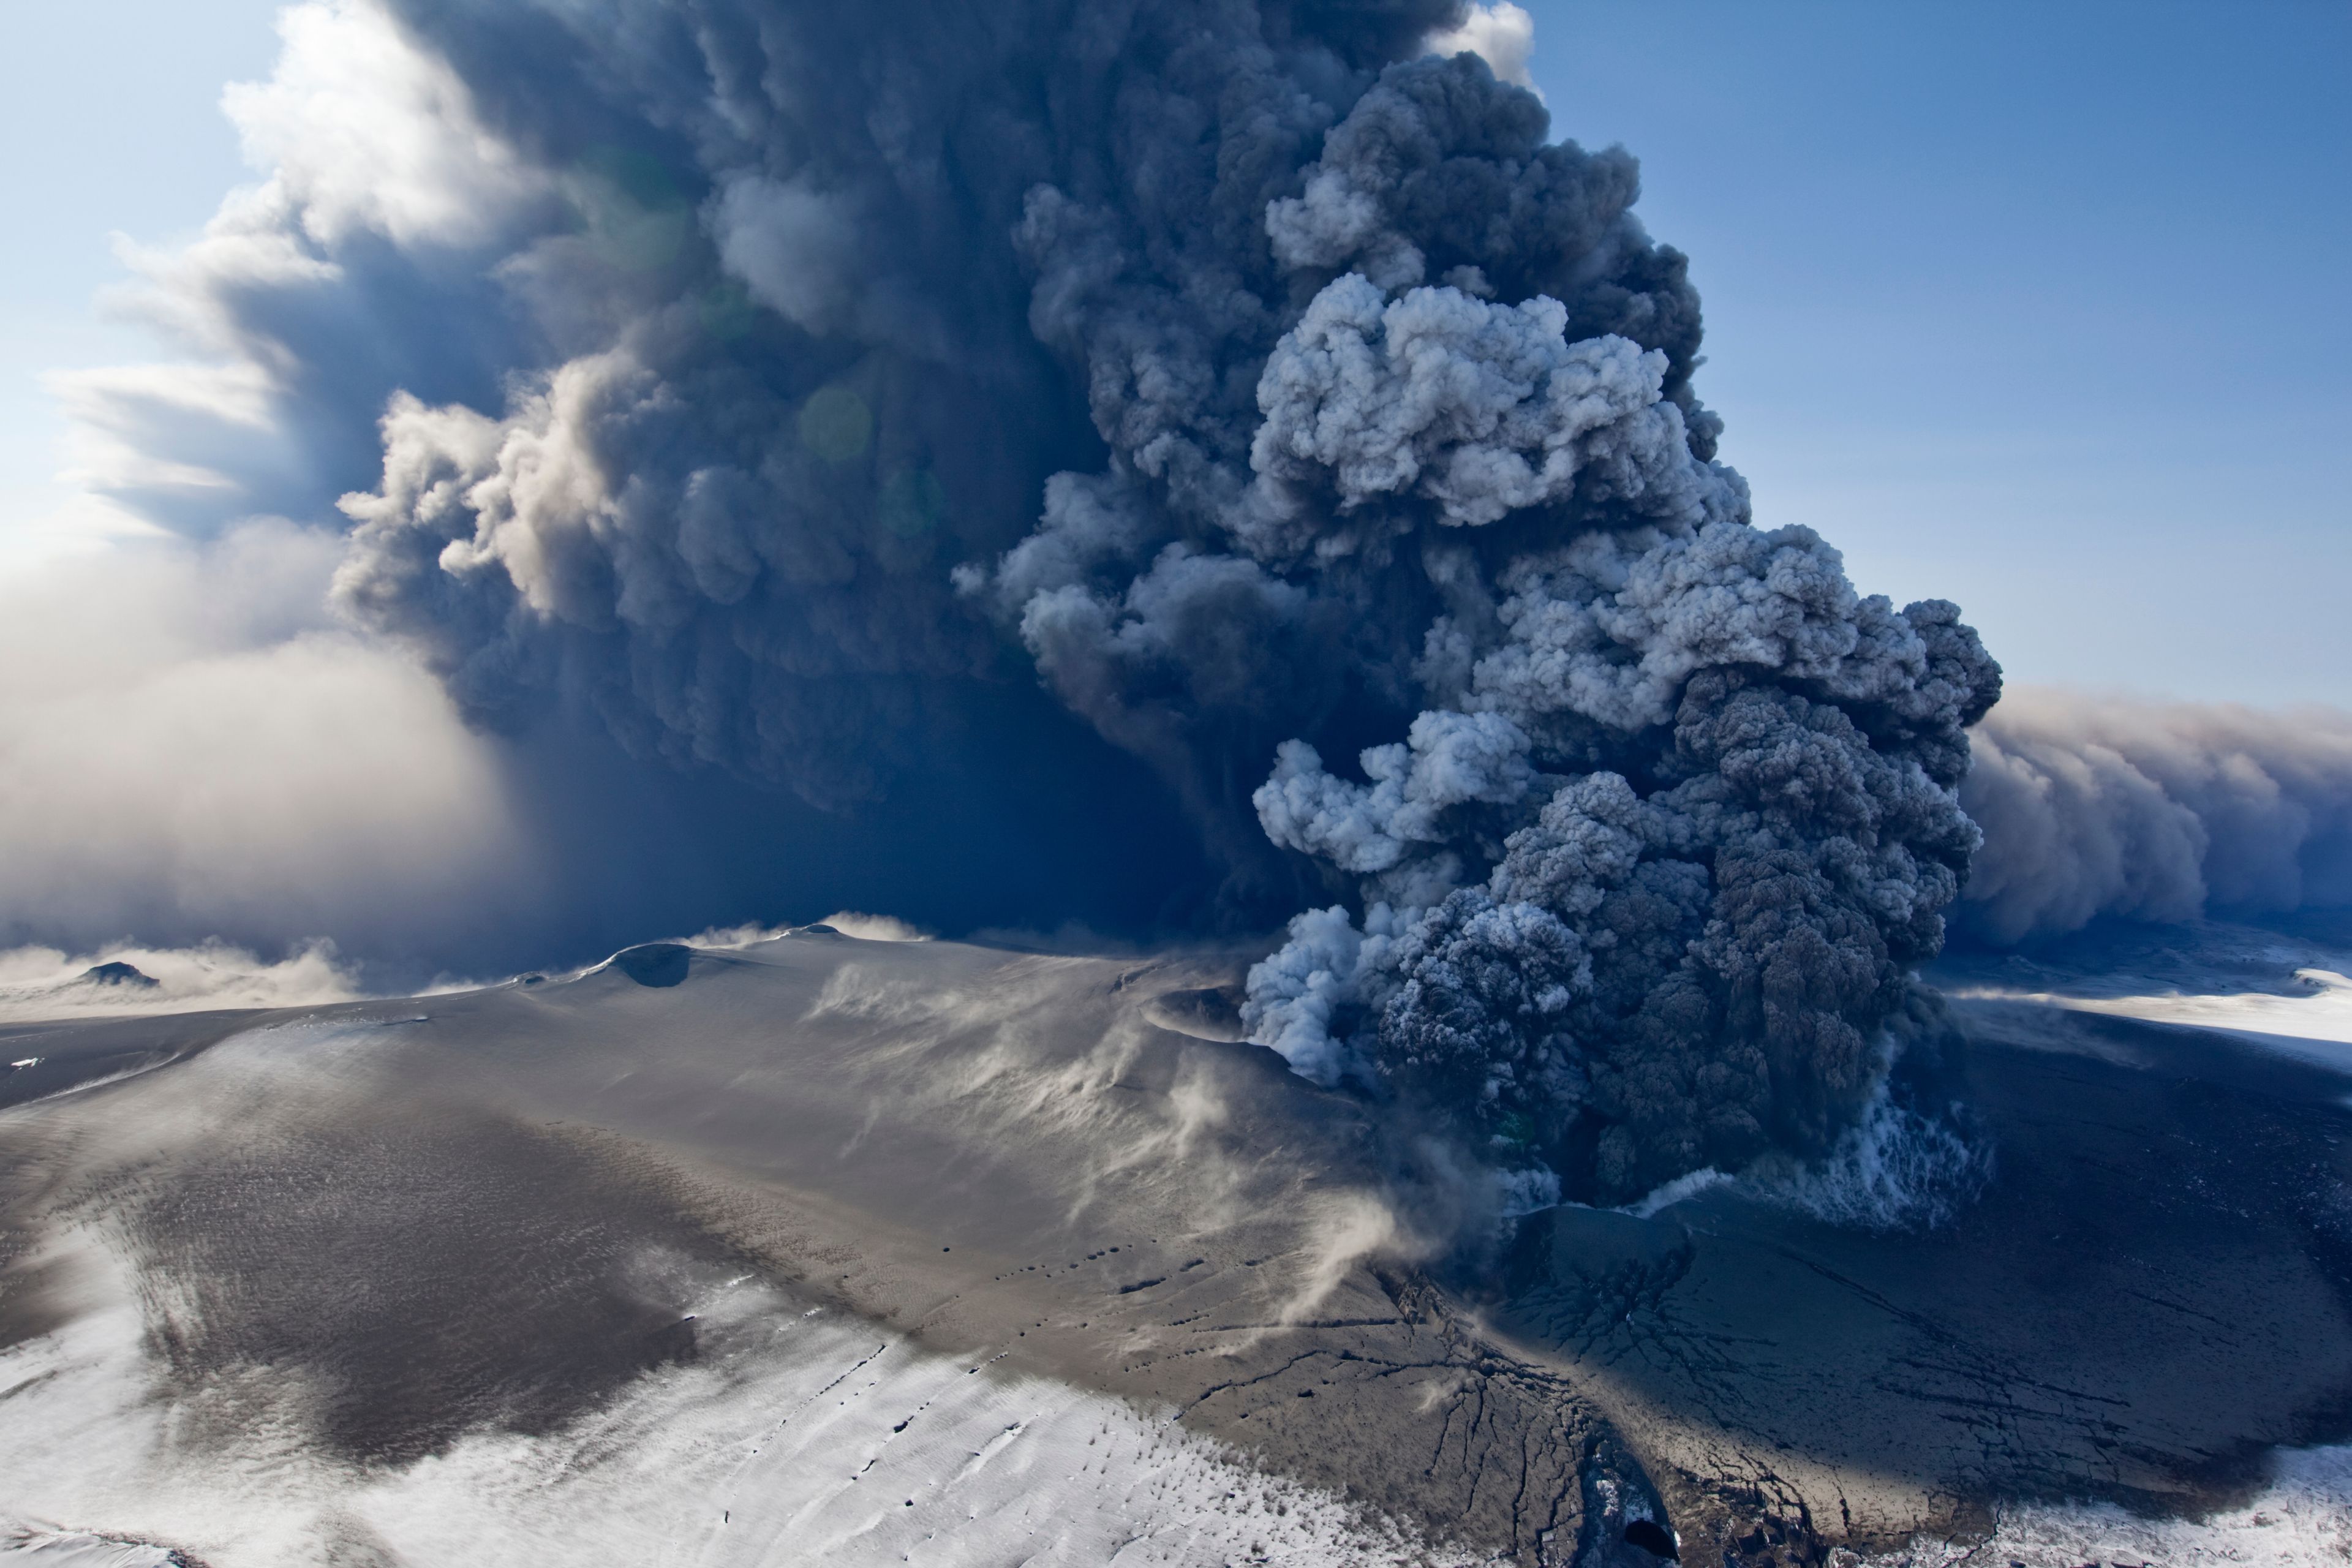 A view of Eyjafjallajökull volcano with ash clouds in the background